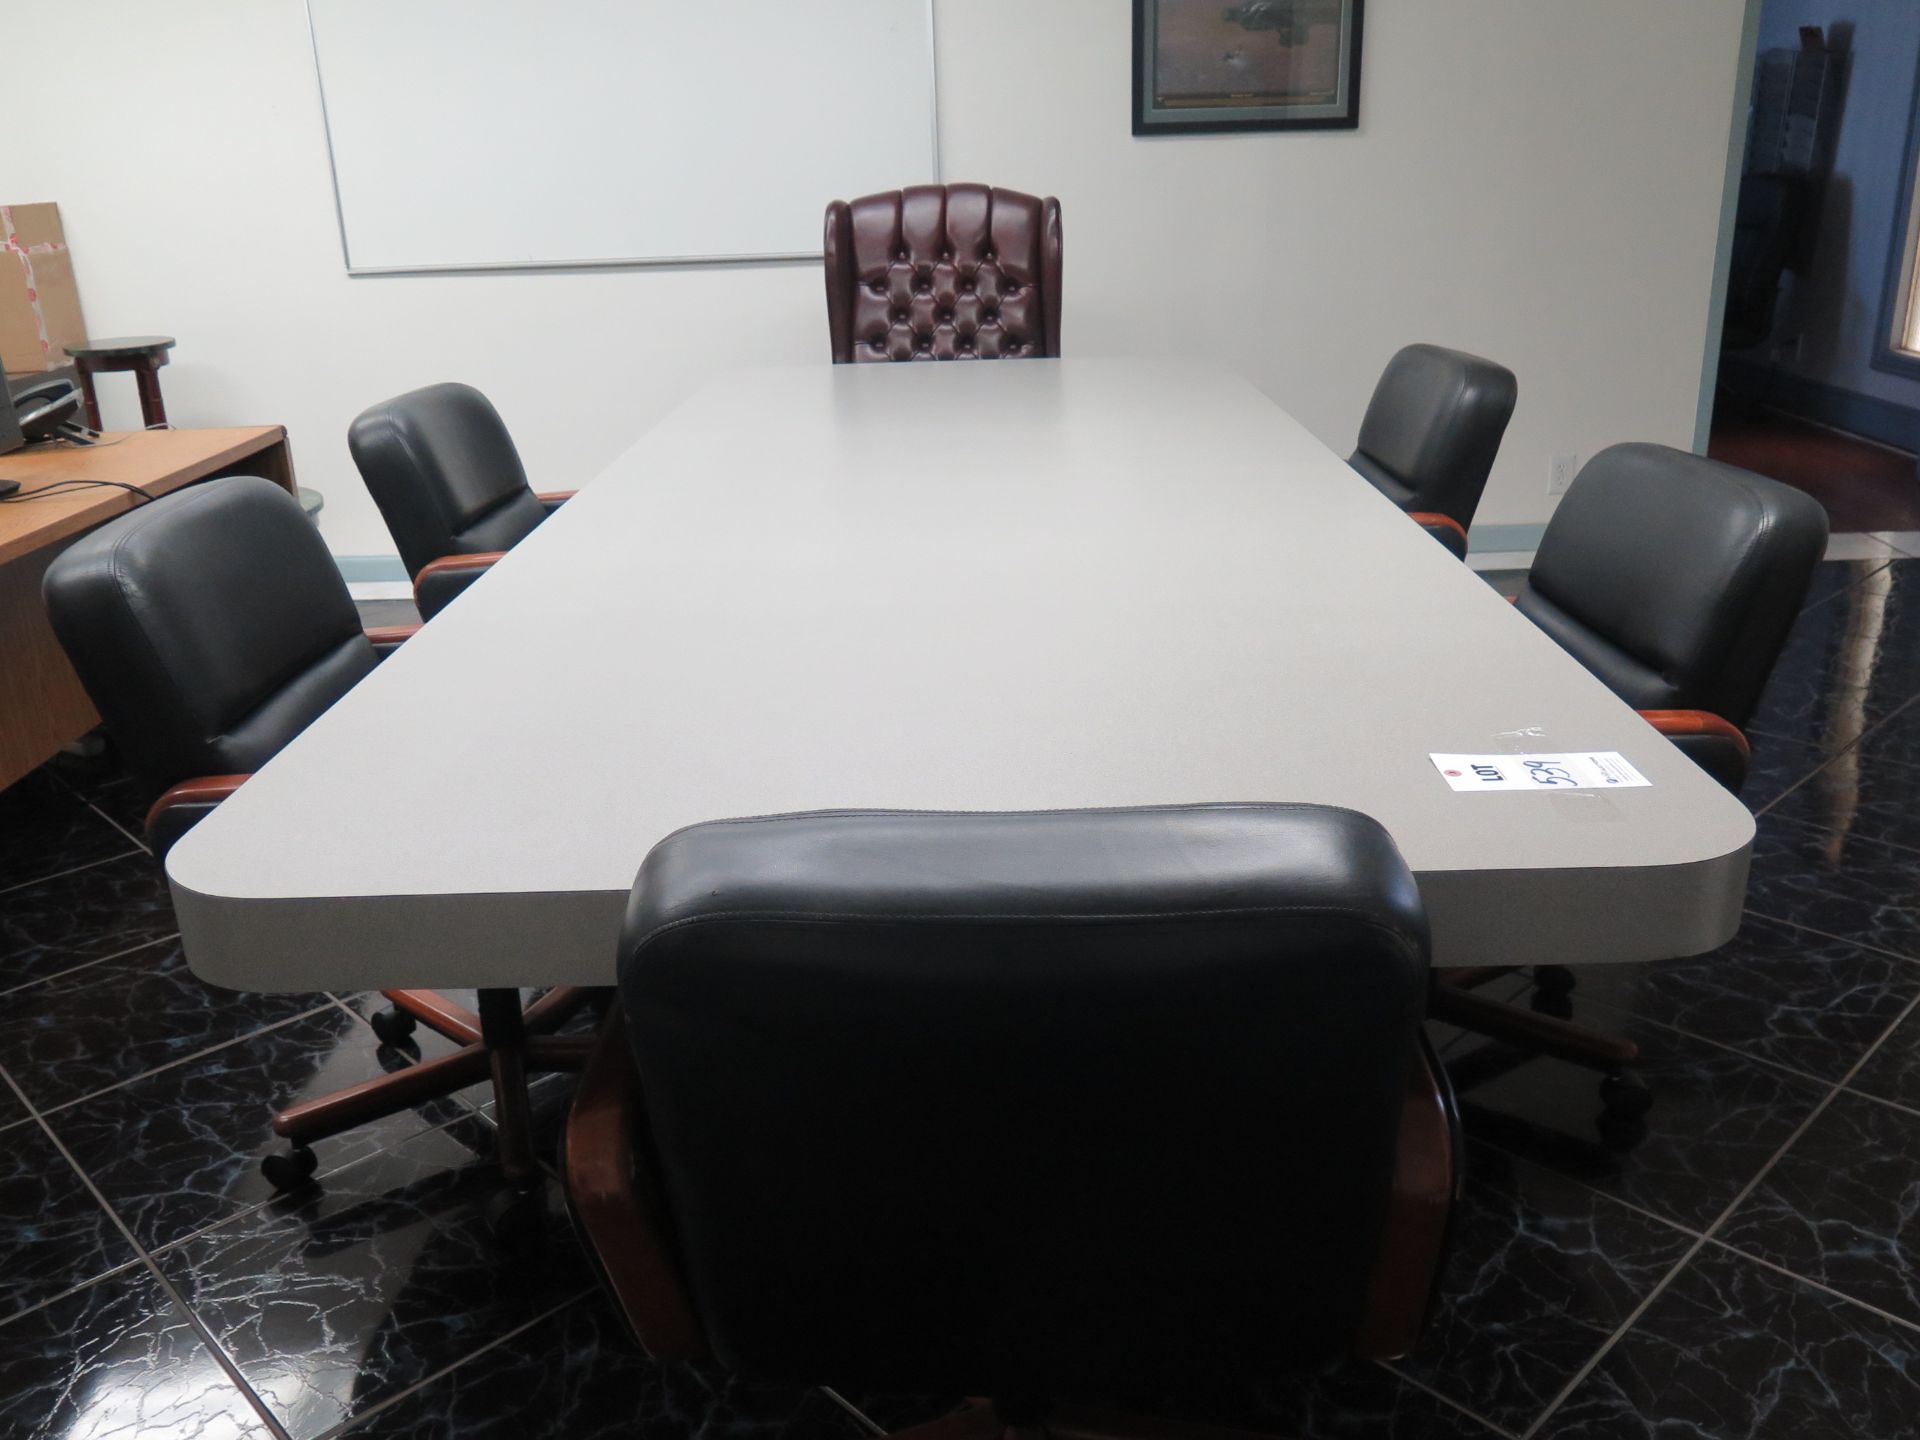 CONFERENCE TABLE AND CHAIRS